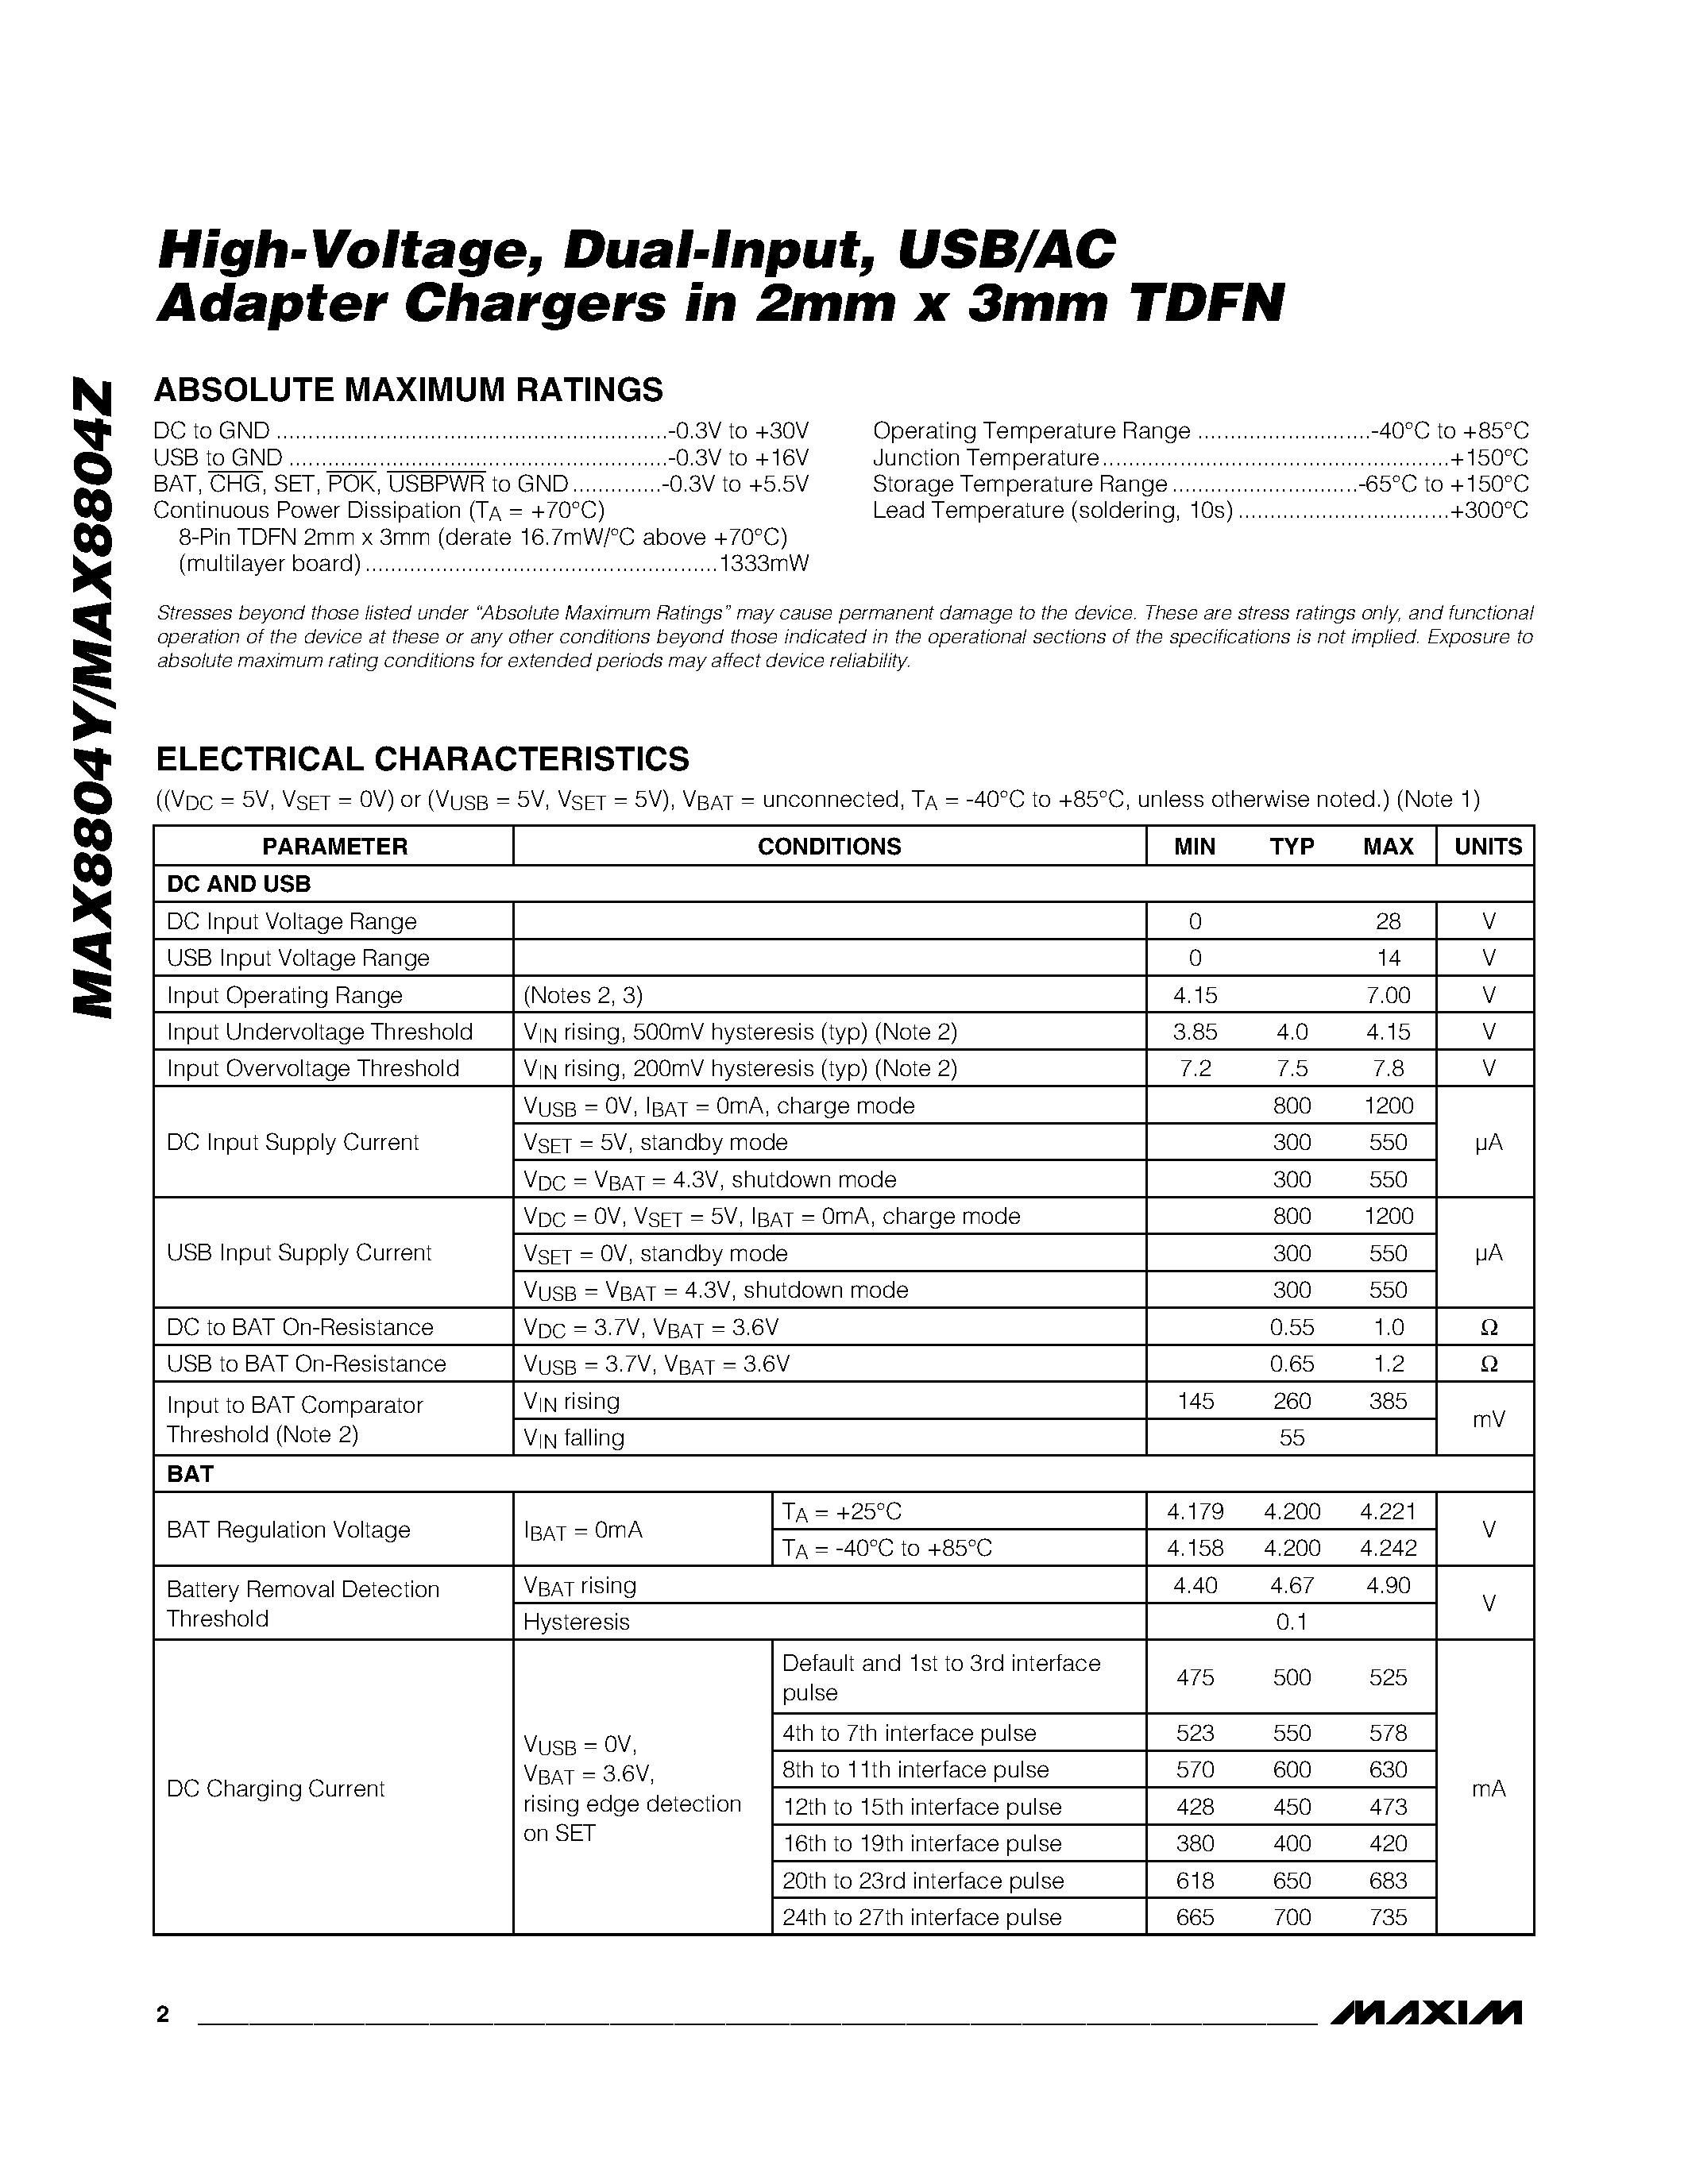 Datasheet MAX8804Y - (MAX8804Y/Z) USB/AC Adapter Chargers page 2